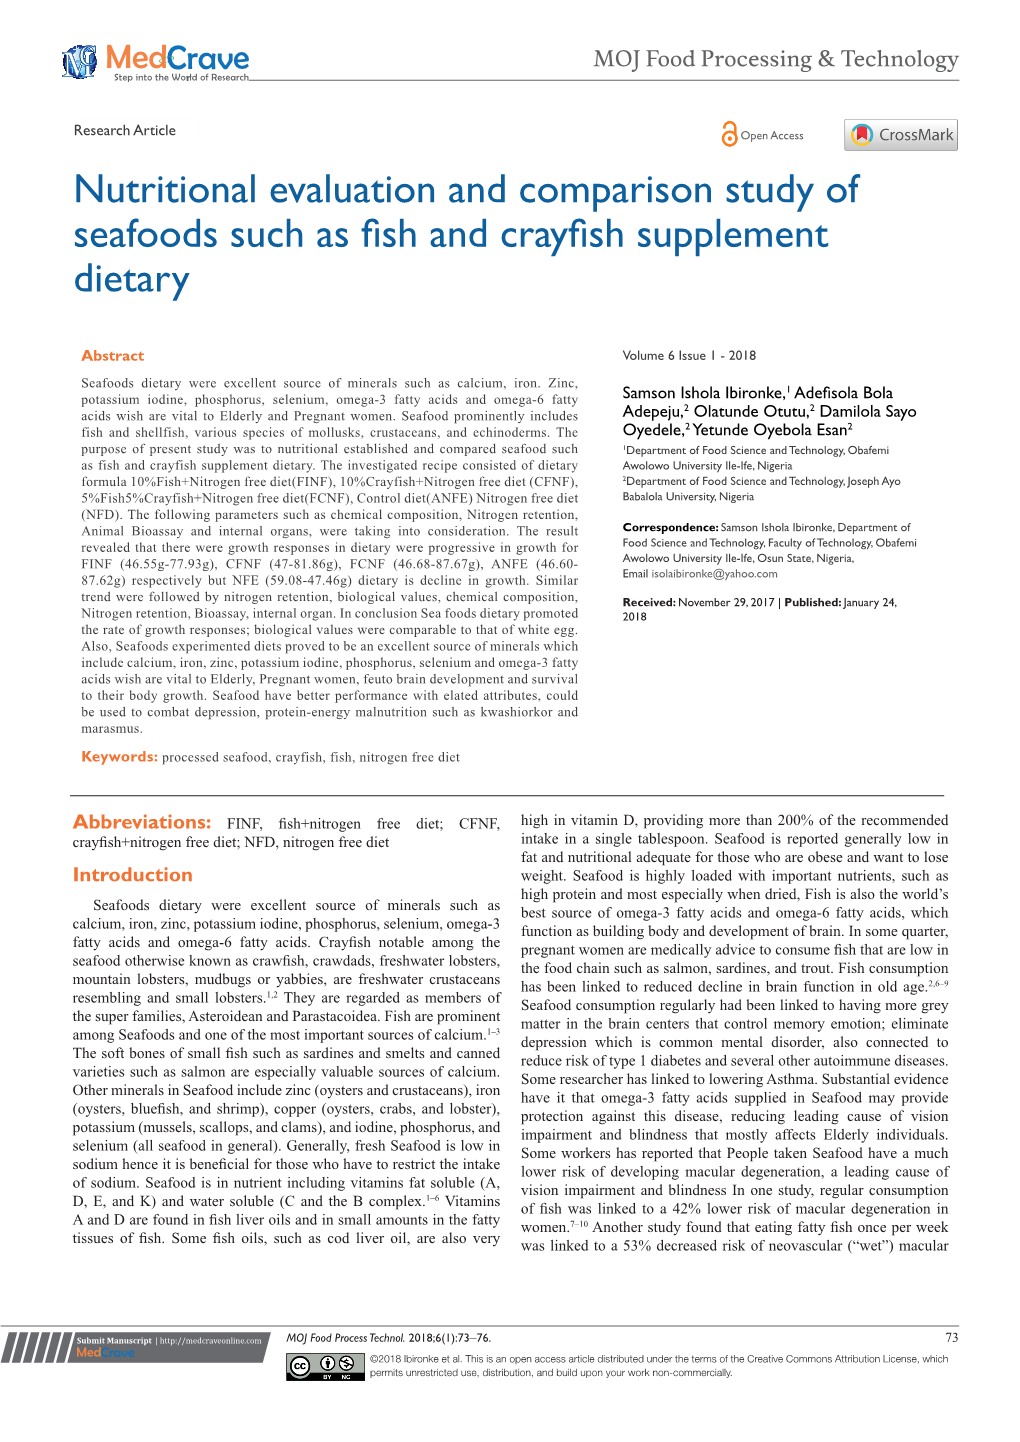 Nutritional Evaluation and Comparison Study of Seafoods Such As Fish and Crayfish Supplement Dietary